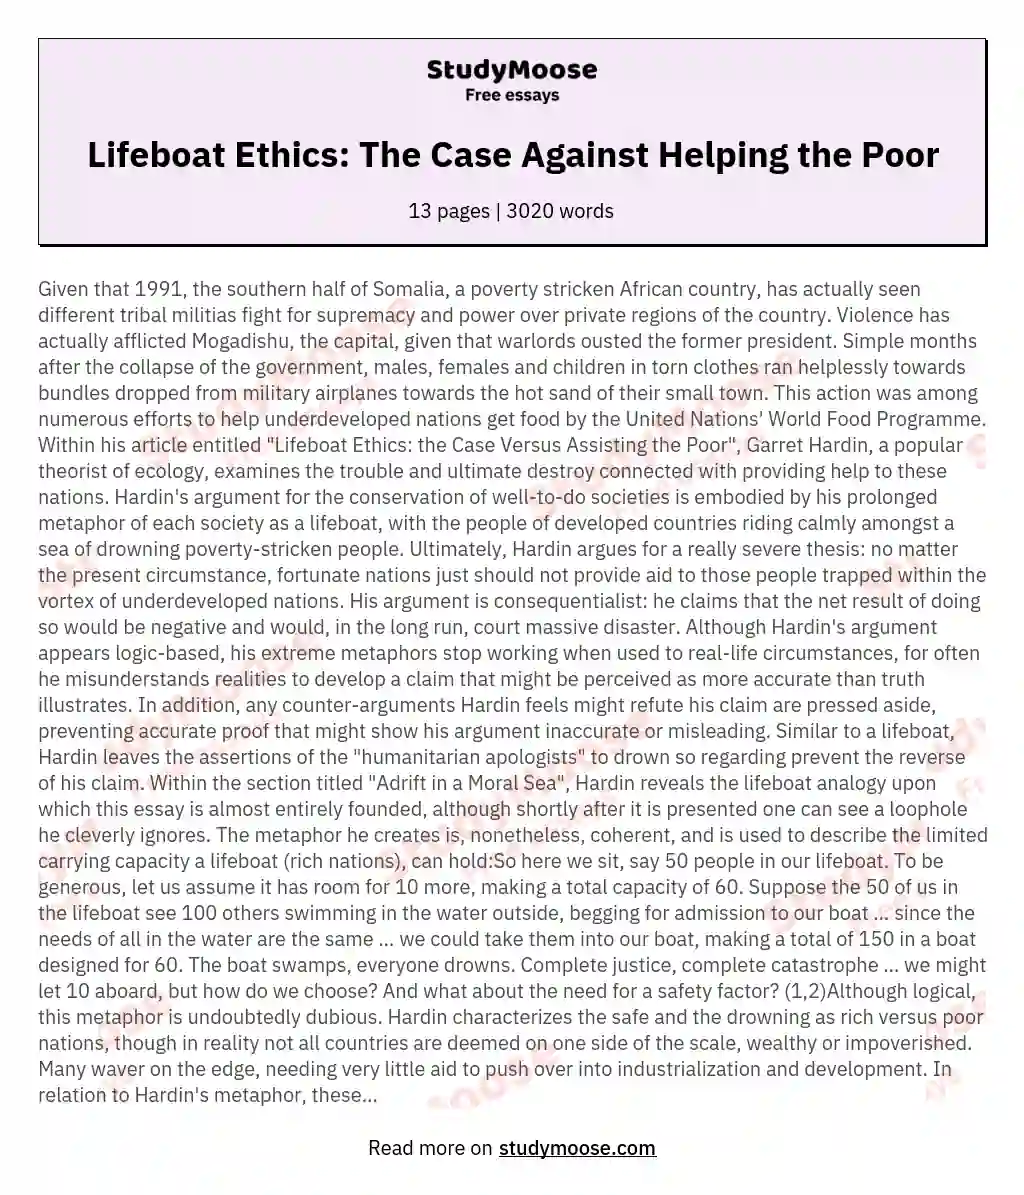 Lifeboat Ethics: The Case Against Helping the Poor essay